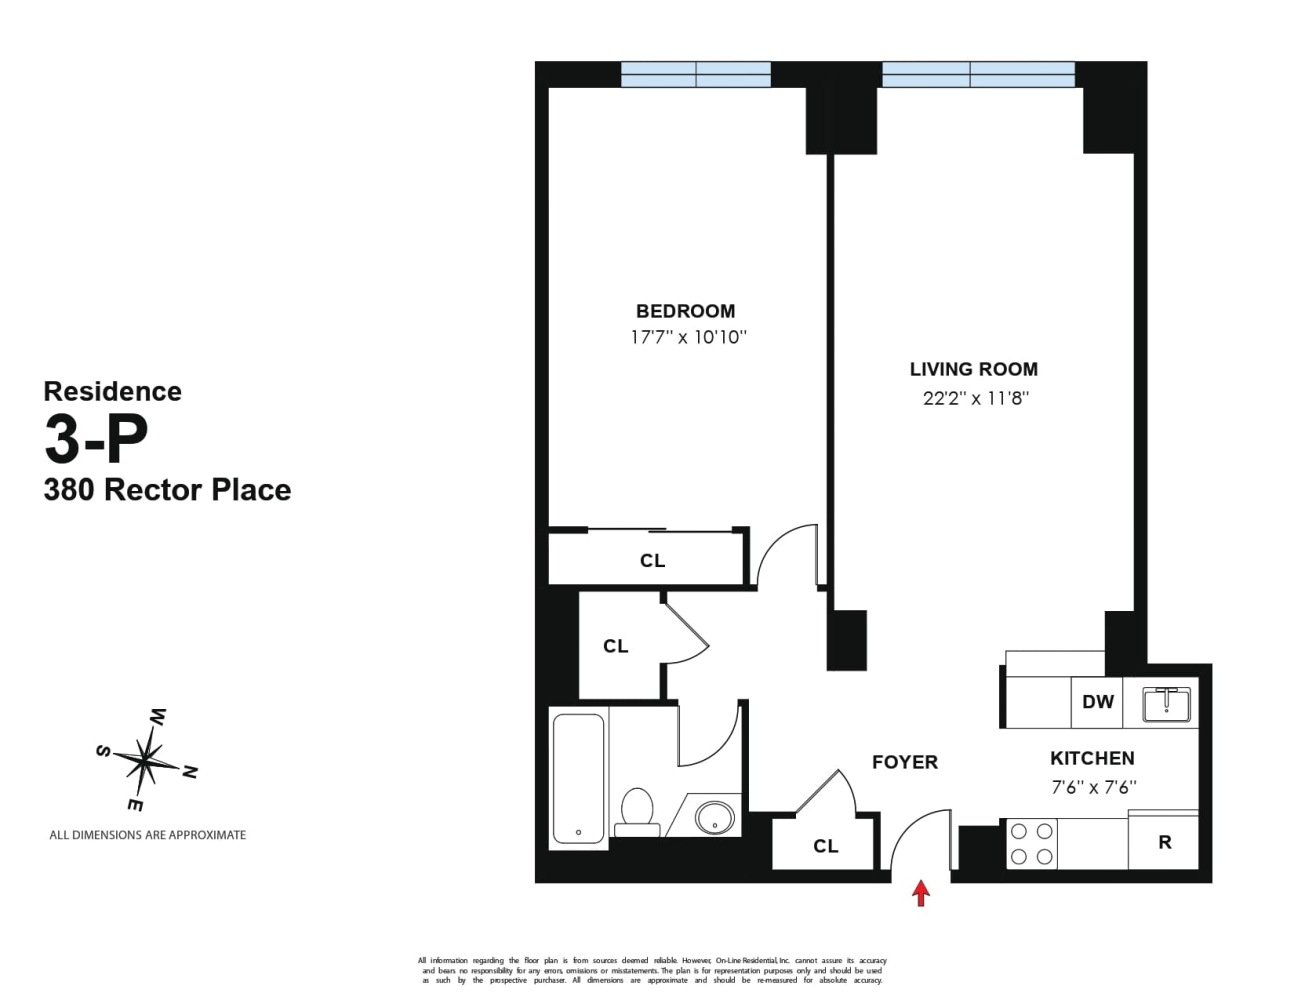 Floorplan for 380 Rector Place, 3P